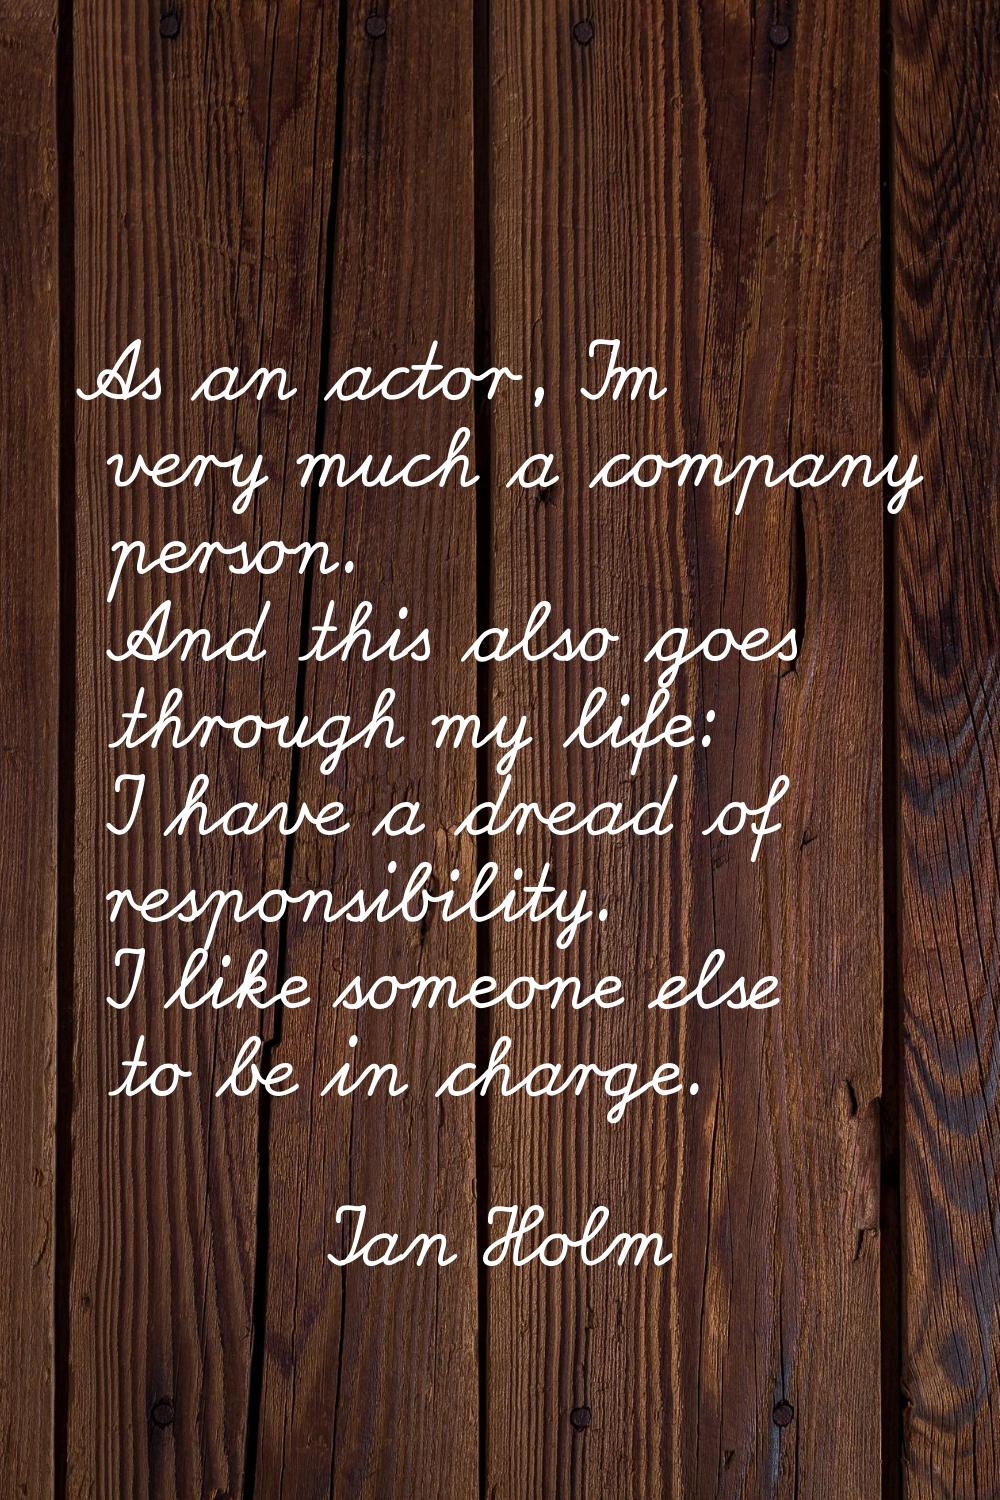 As an actor, I'm very much a company person. And this also goes through my life: I have a dread of 